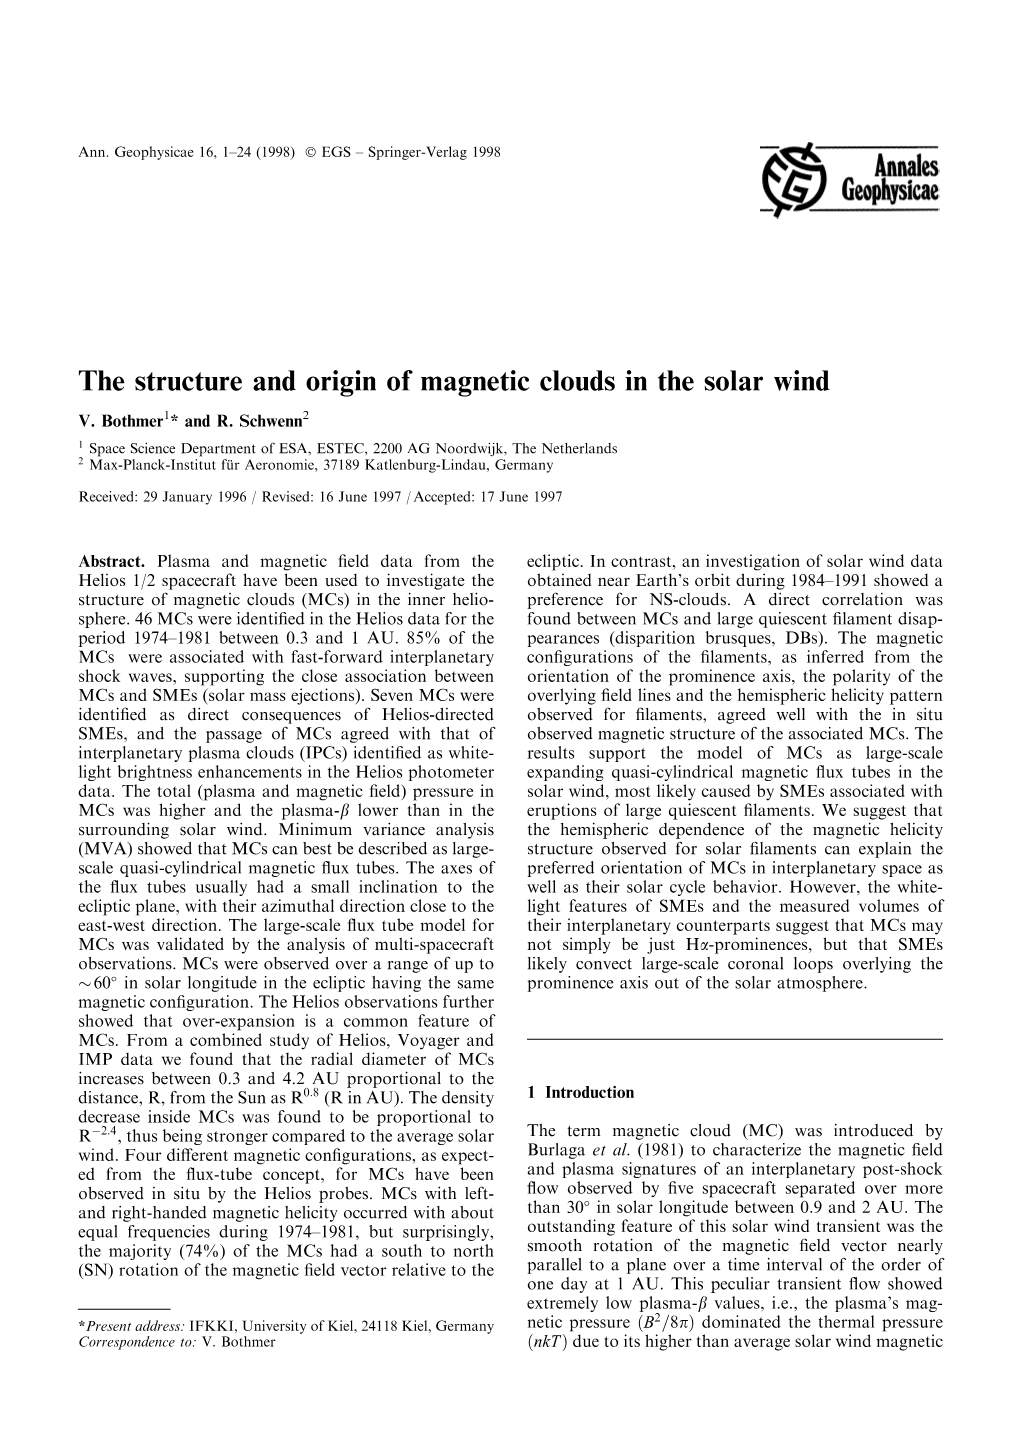 The Structure and Origin of Magnetic Clouds in the Solar Wind V